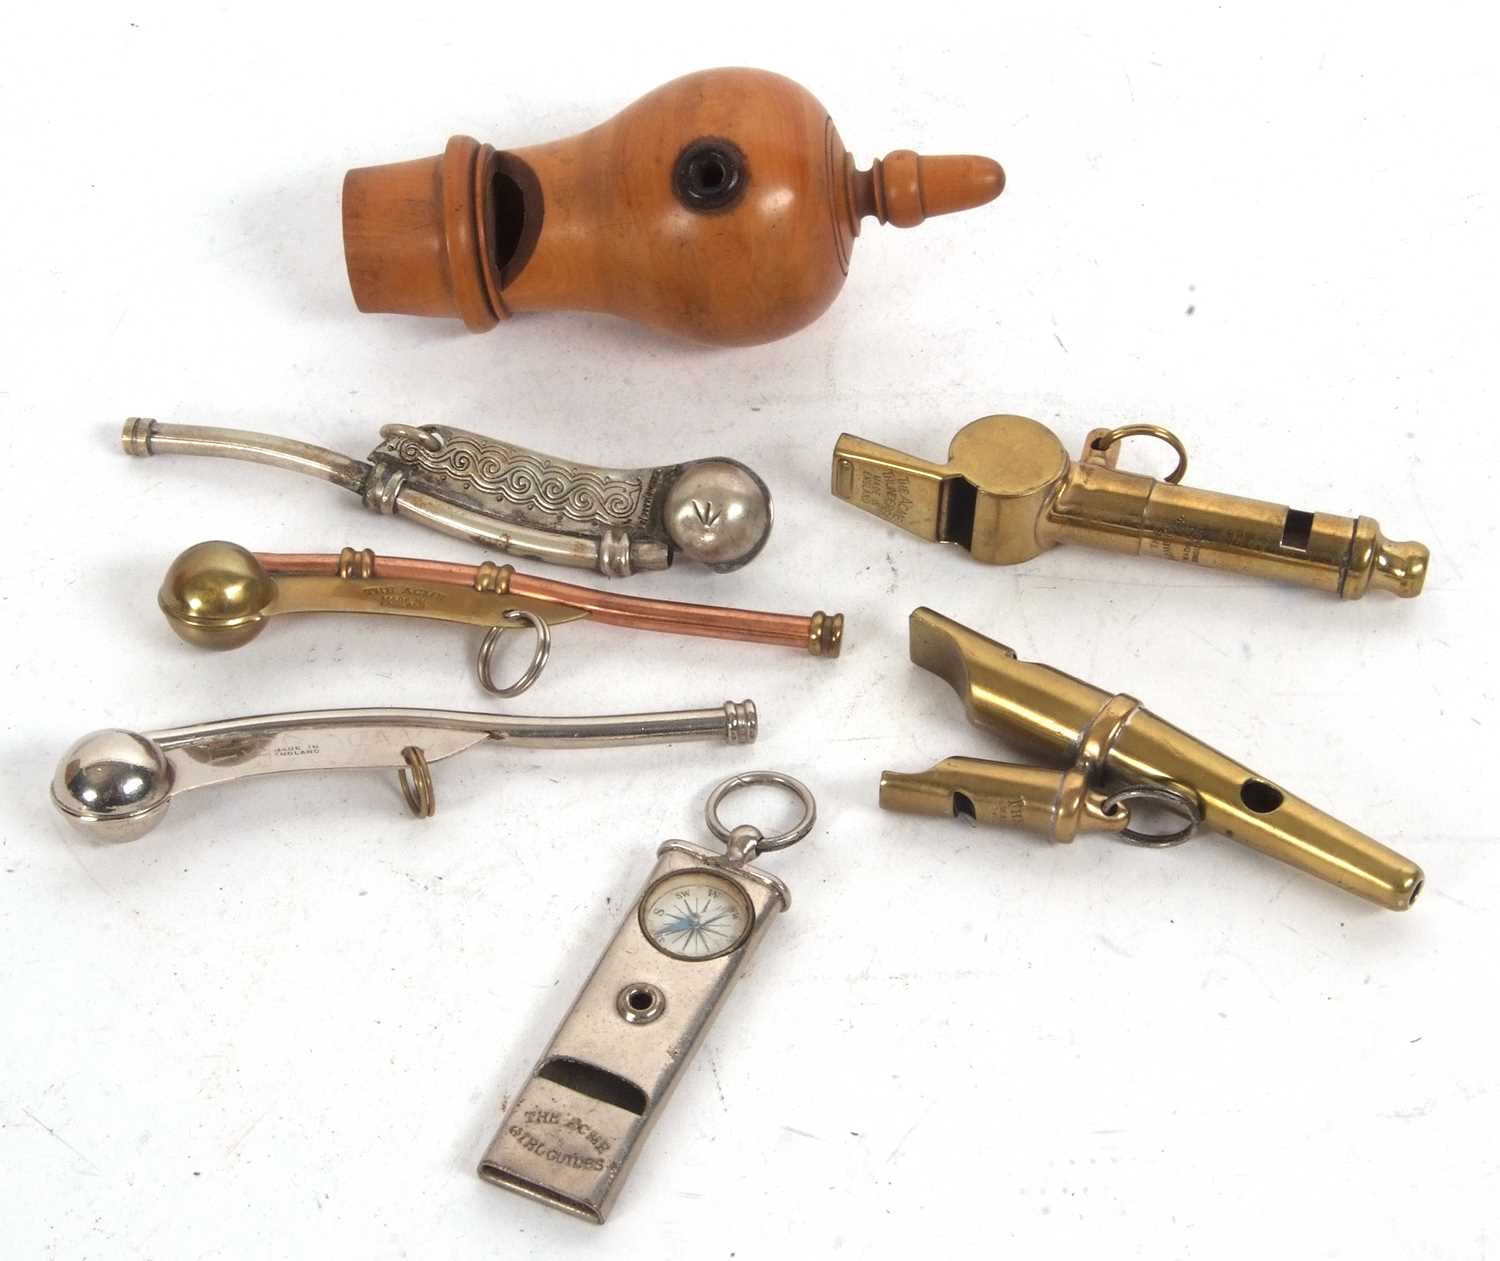 A group of seven various vintage whistles, to include three Bosuns whistles, Acmes Girl Guides